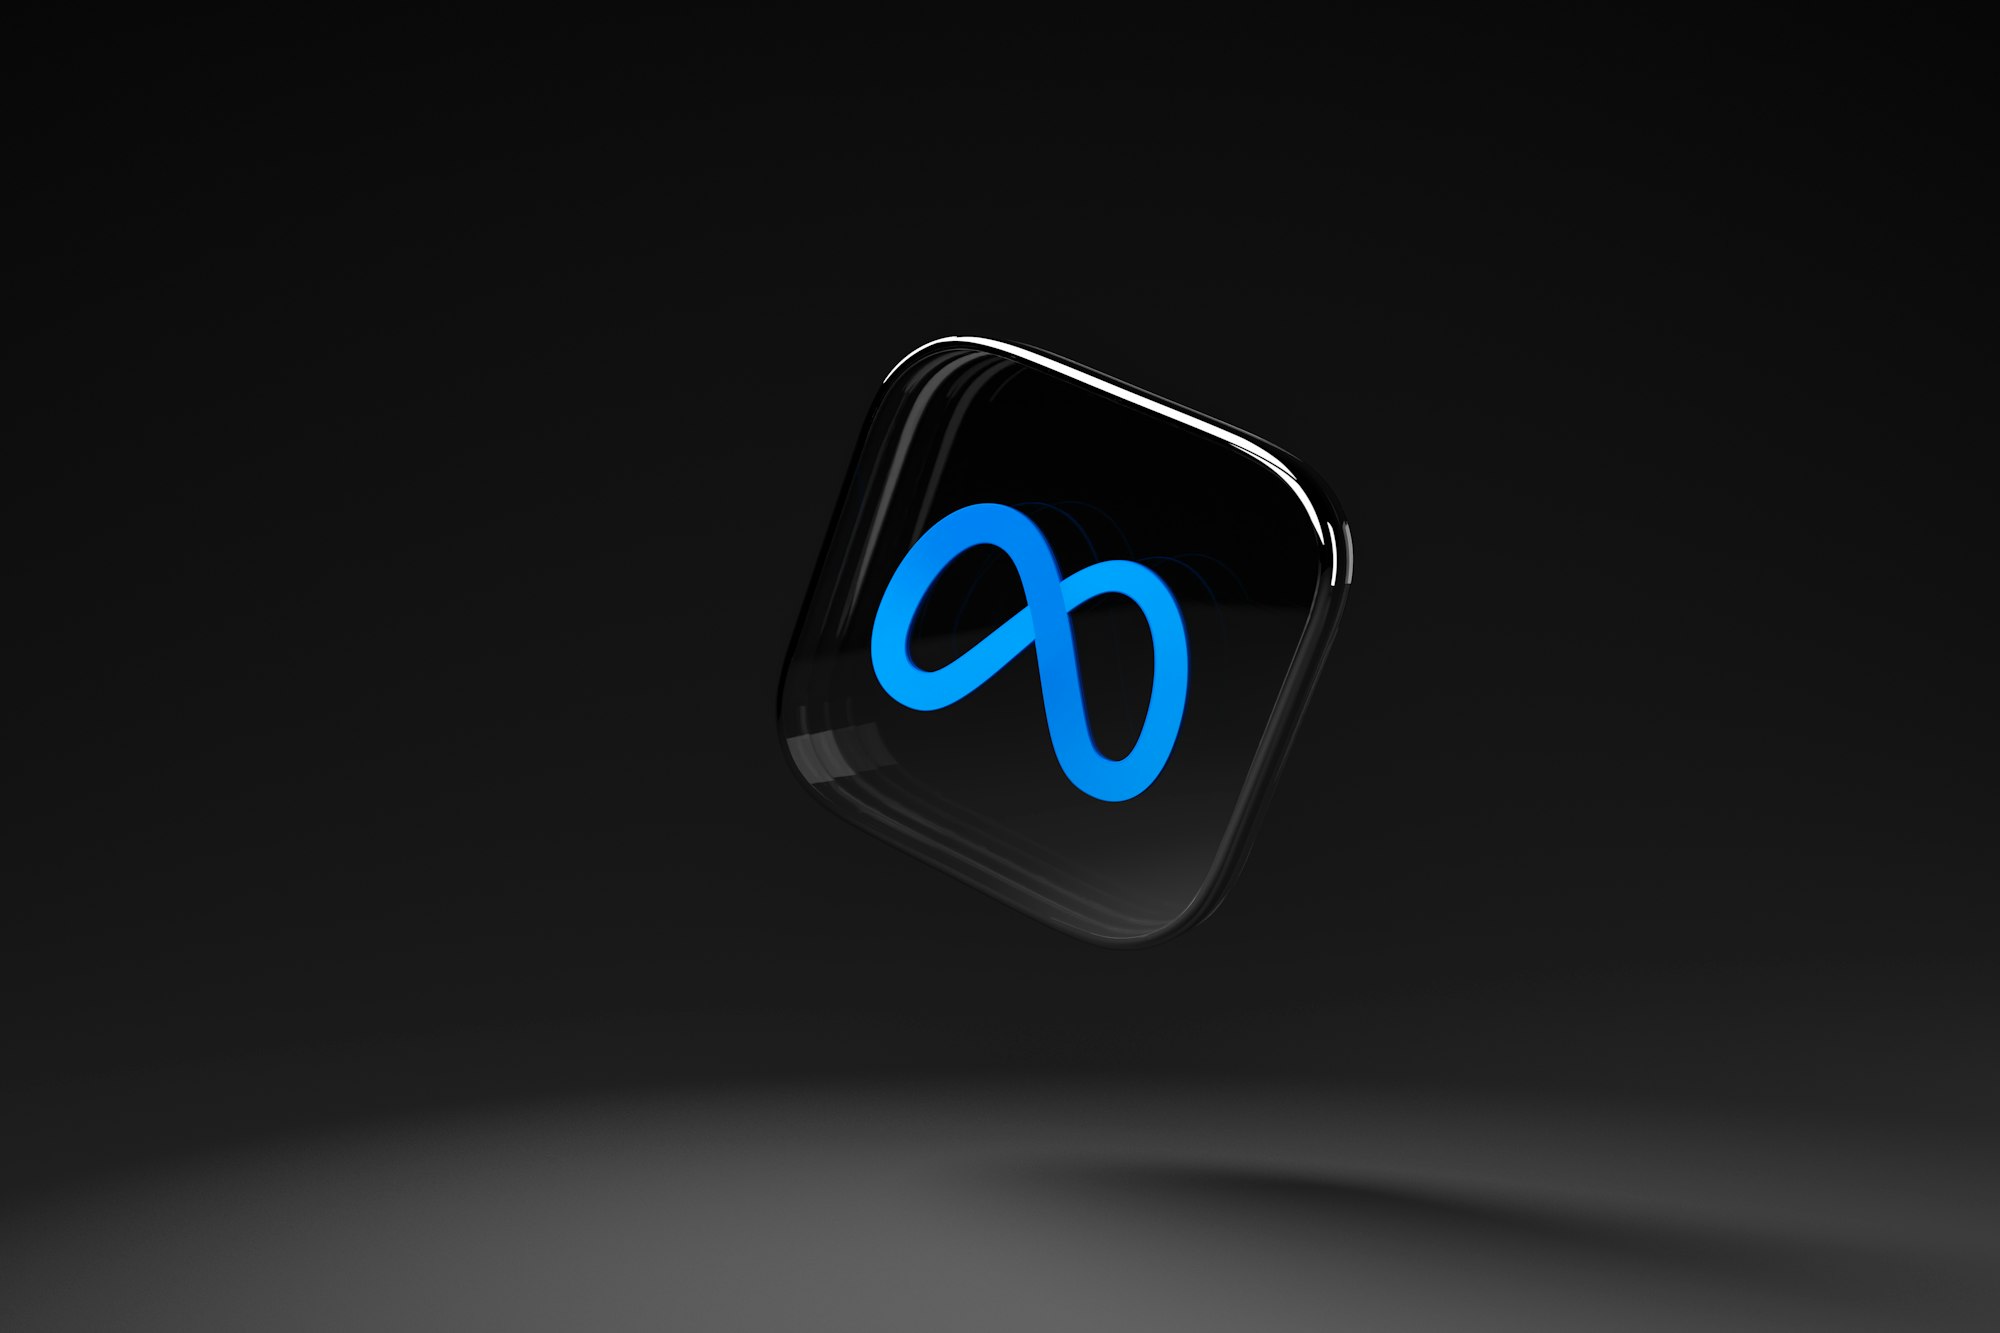 Meta app icon in 3D (Dark theme). 

More 3D app icons like these are coming soon. You can find my 3D work in the collection called "3D Design".
